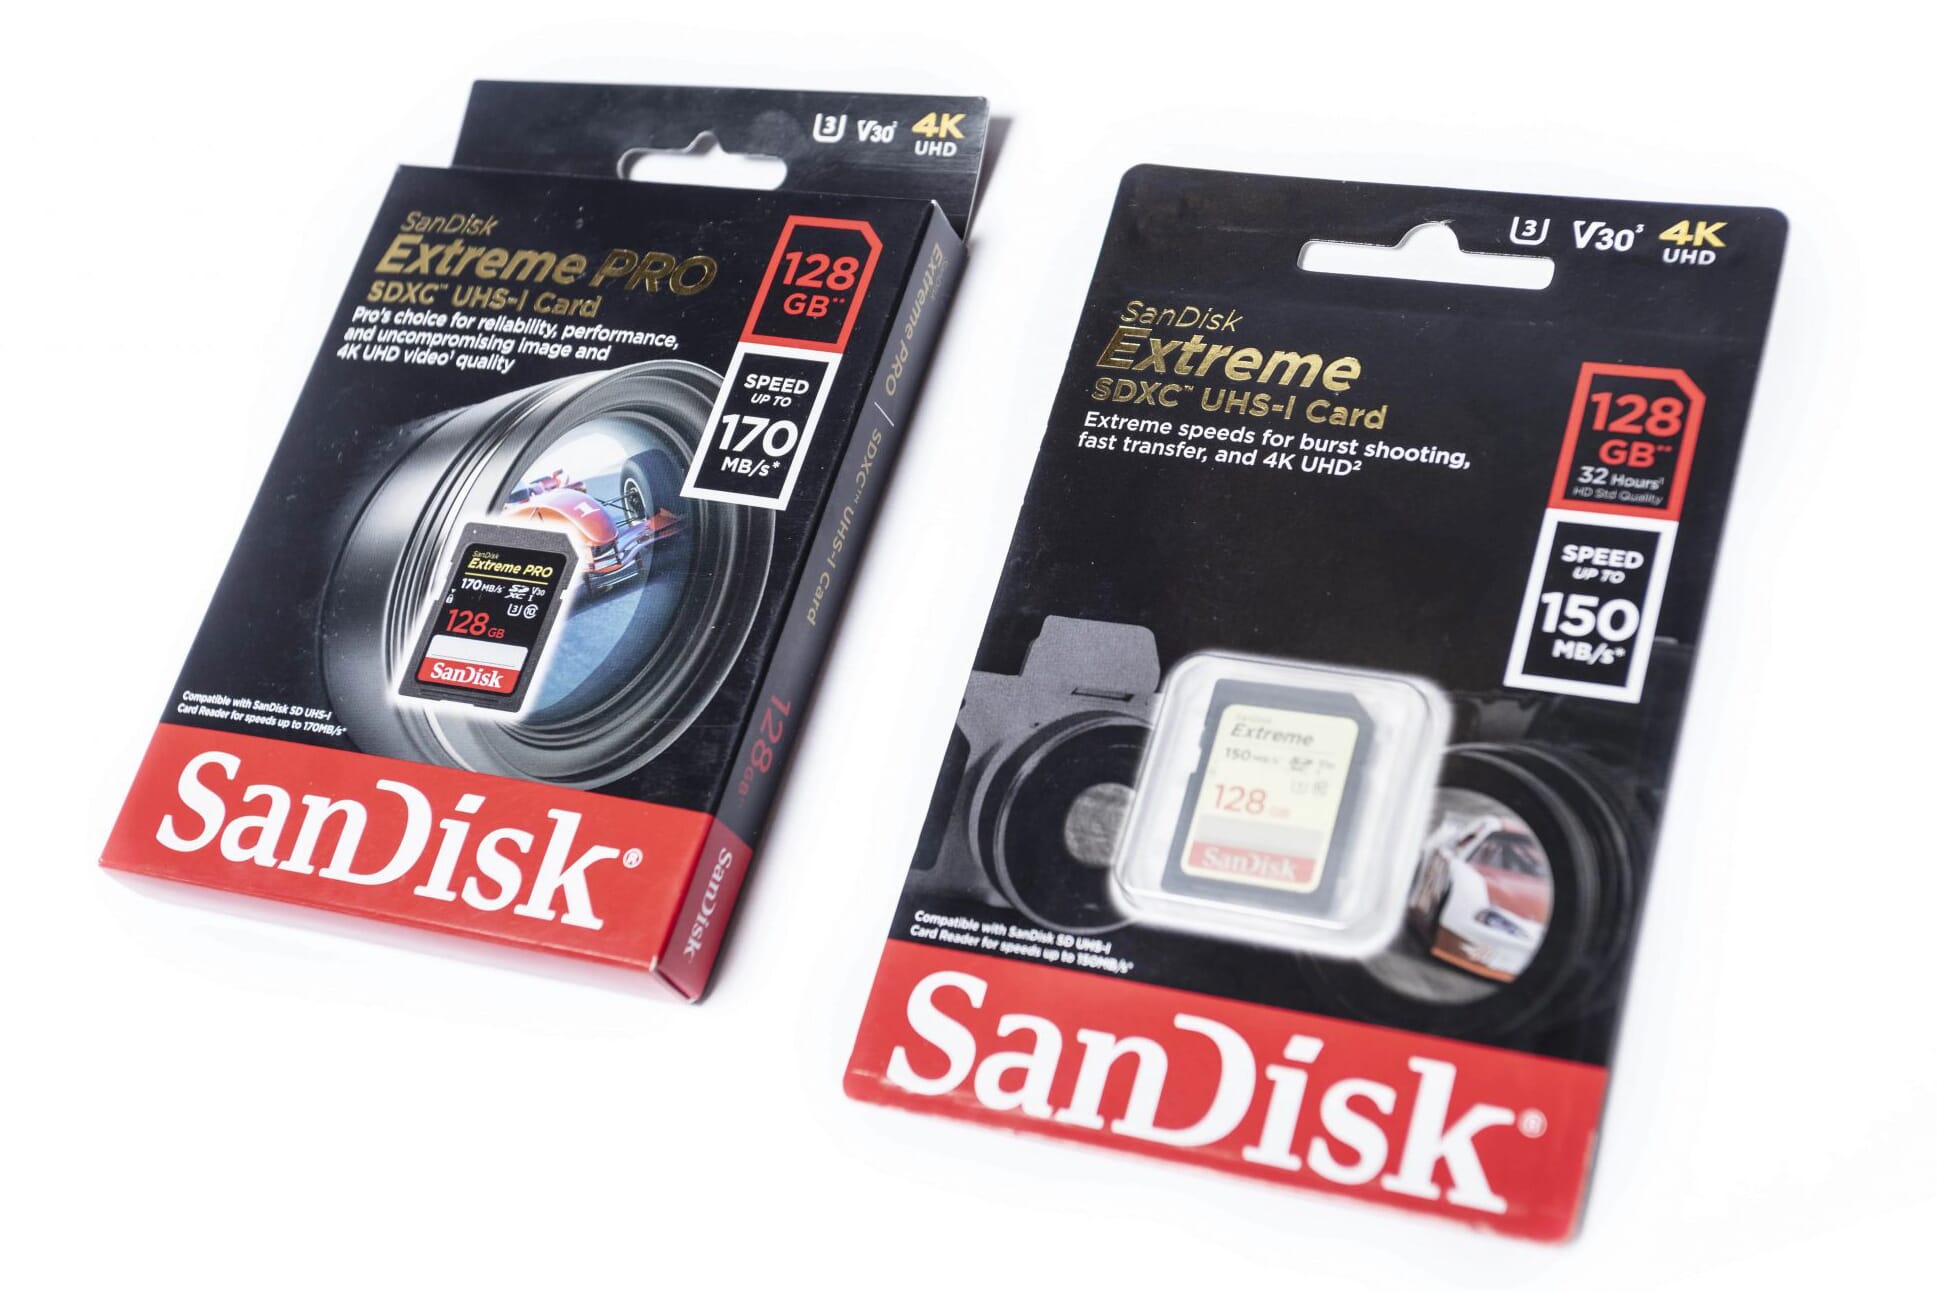 SANDISK CARDS Extreme Pro 32GB SDHC Memory Card 100MB/S 90MB/S UHS-I Class 